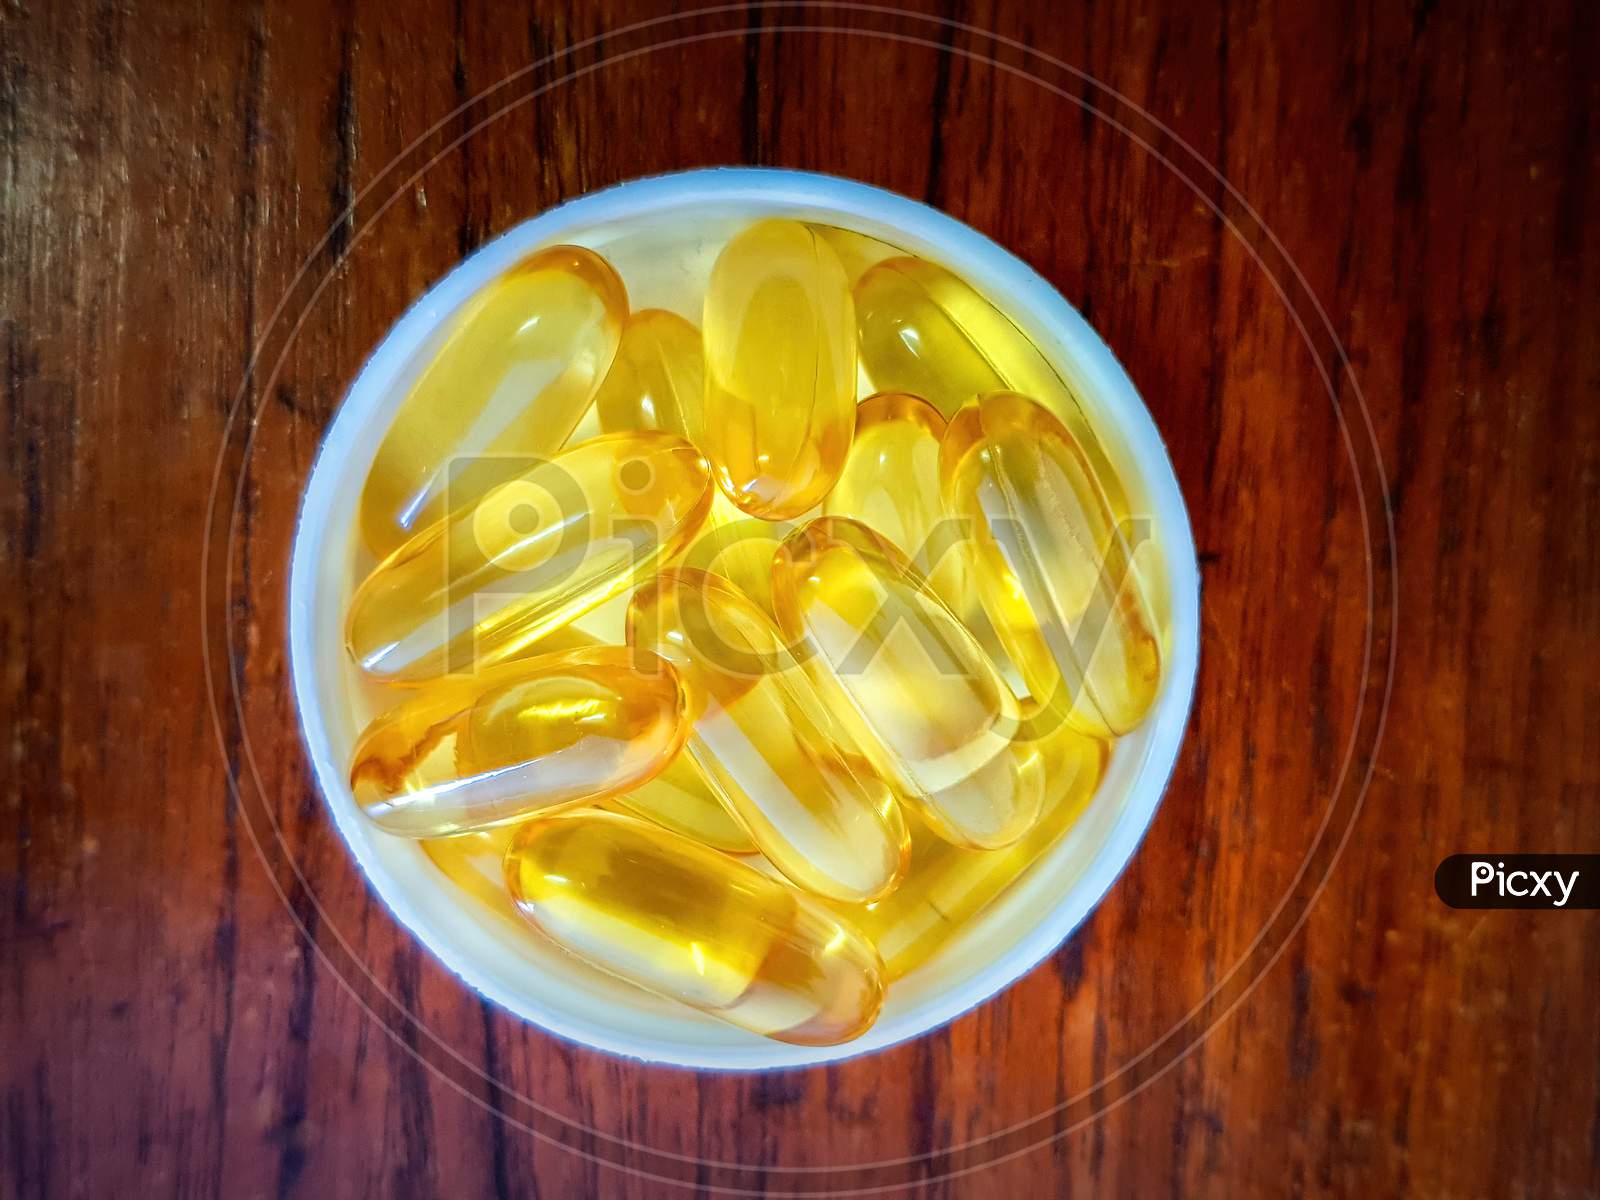 Healthy Diet, Fish Oil Capsules With Omega 3 And Vitamin D For Daily Supplement